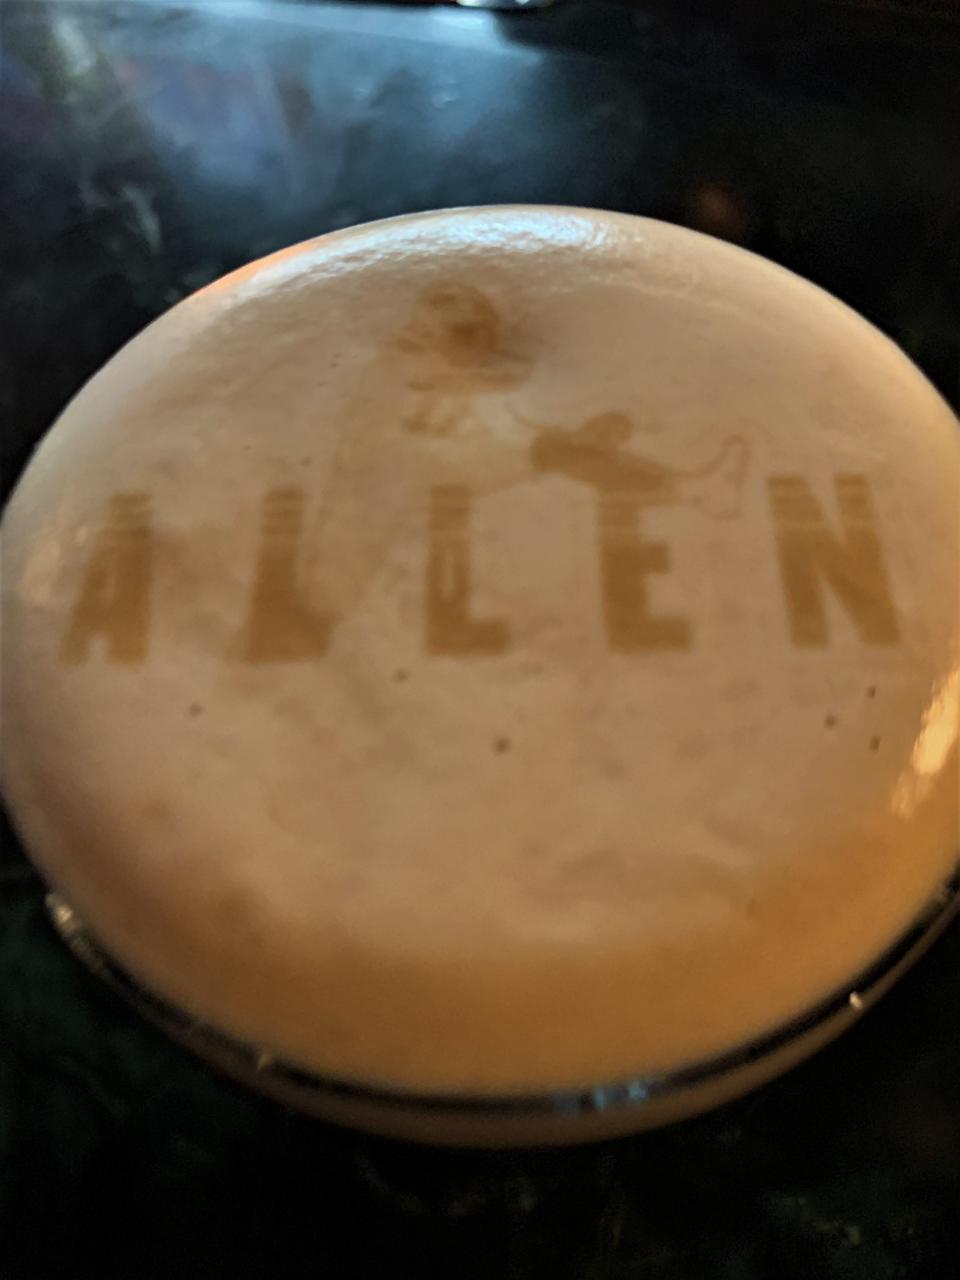 Josh Allen hurdles his name in a malt image imprinted in the foam atop a pint of Guiness at Bar-Bill Tavern in East Aurora, New York on Jan. 28, 2022. Allen, a regular at the restaurant not from HIghmark Stadium, has fans eager to buy him his next beer.